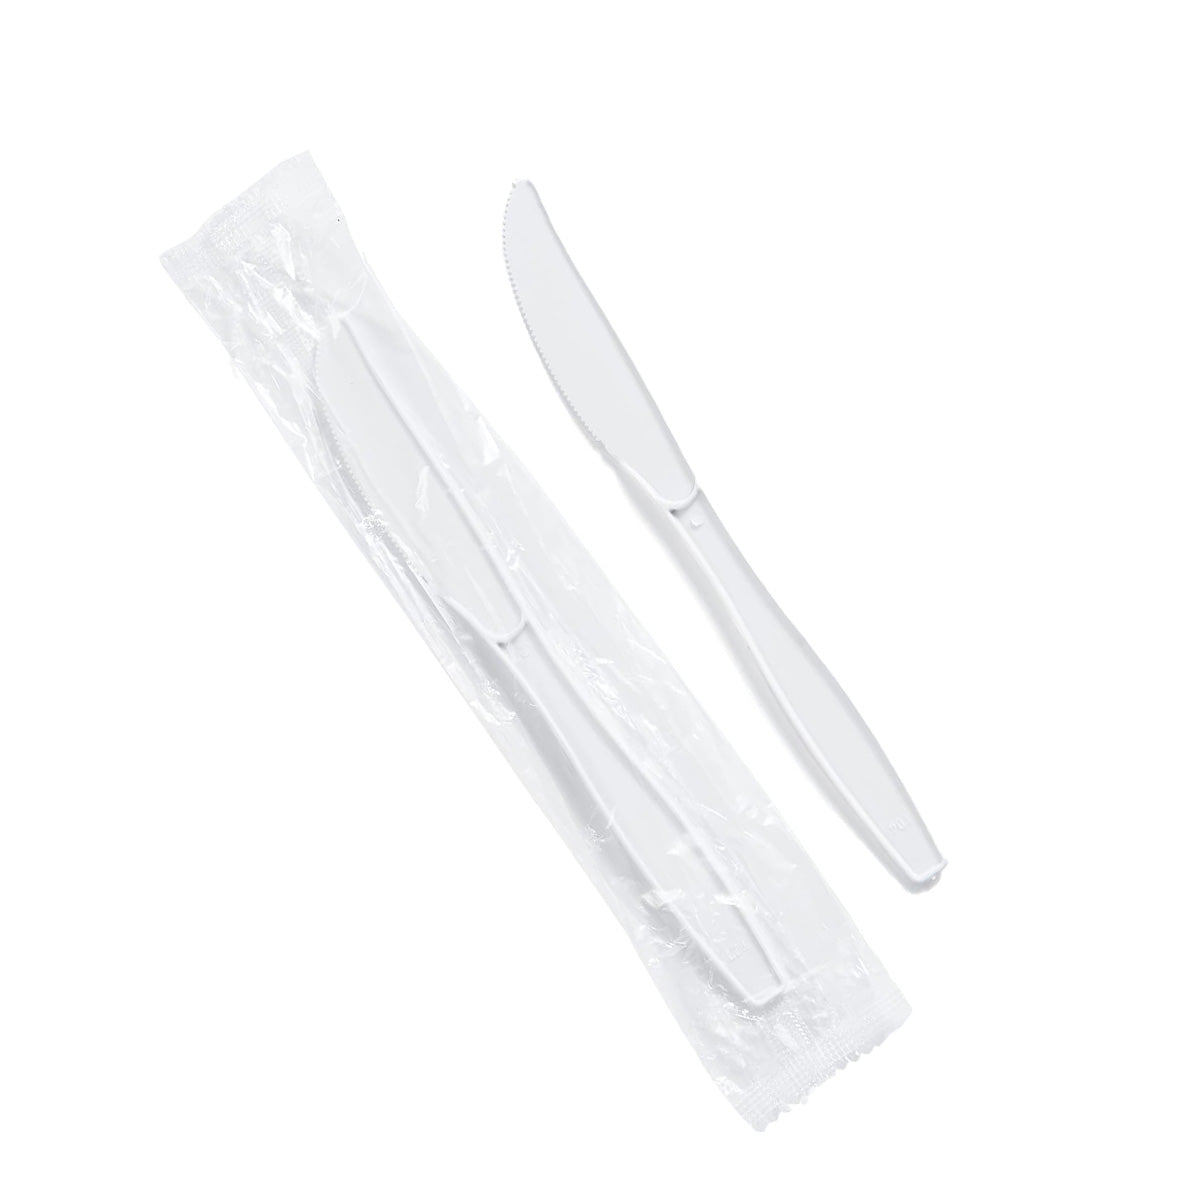 CIAO! Medium Weight Disposable White Knife Polypropylene Individually Wrapped (Case of 1,000)